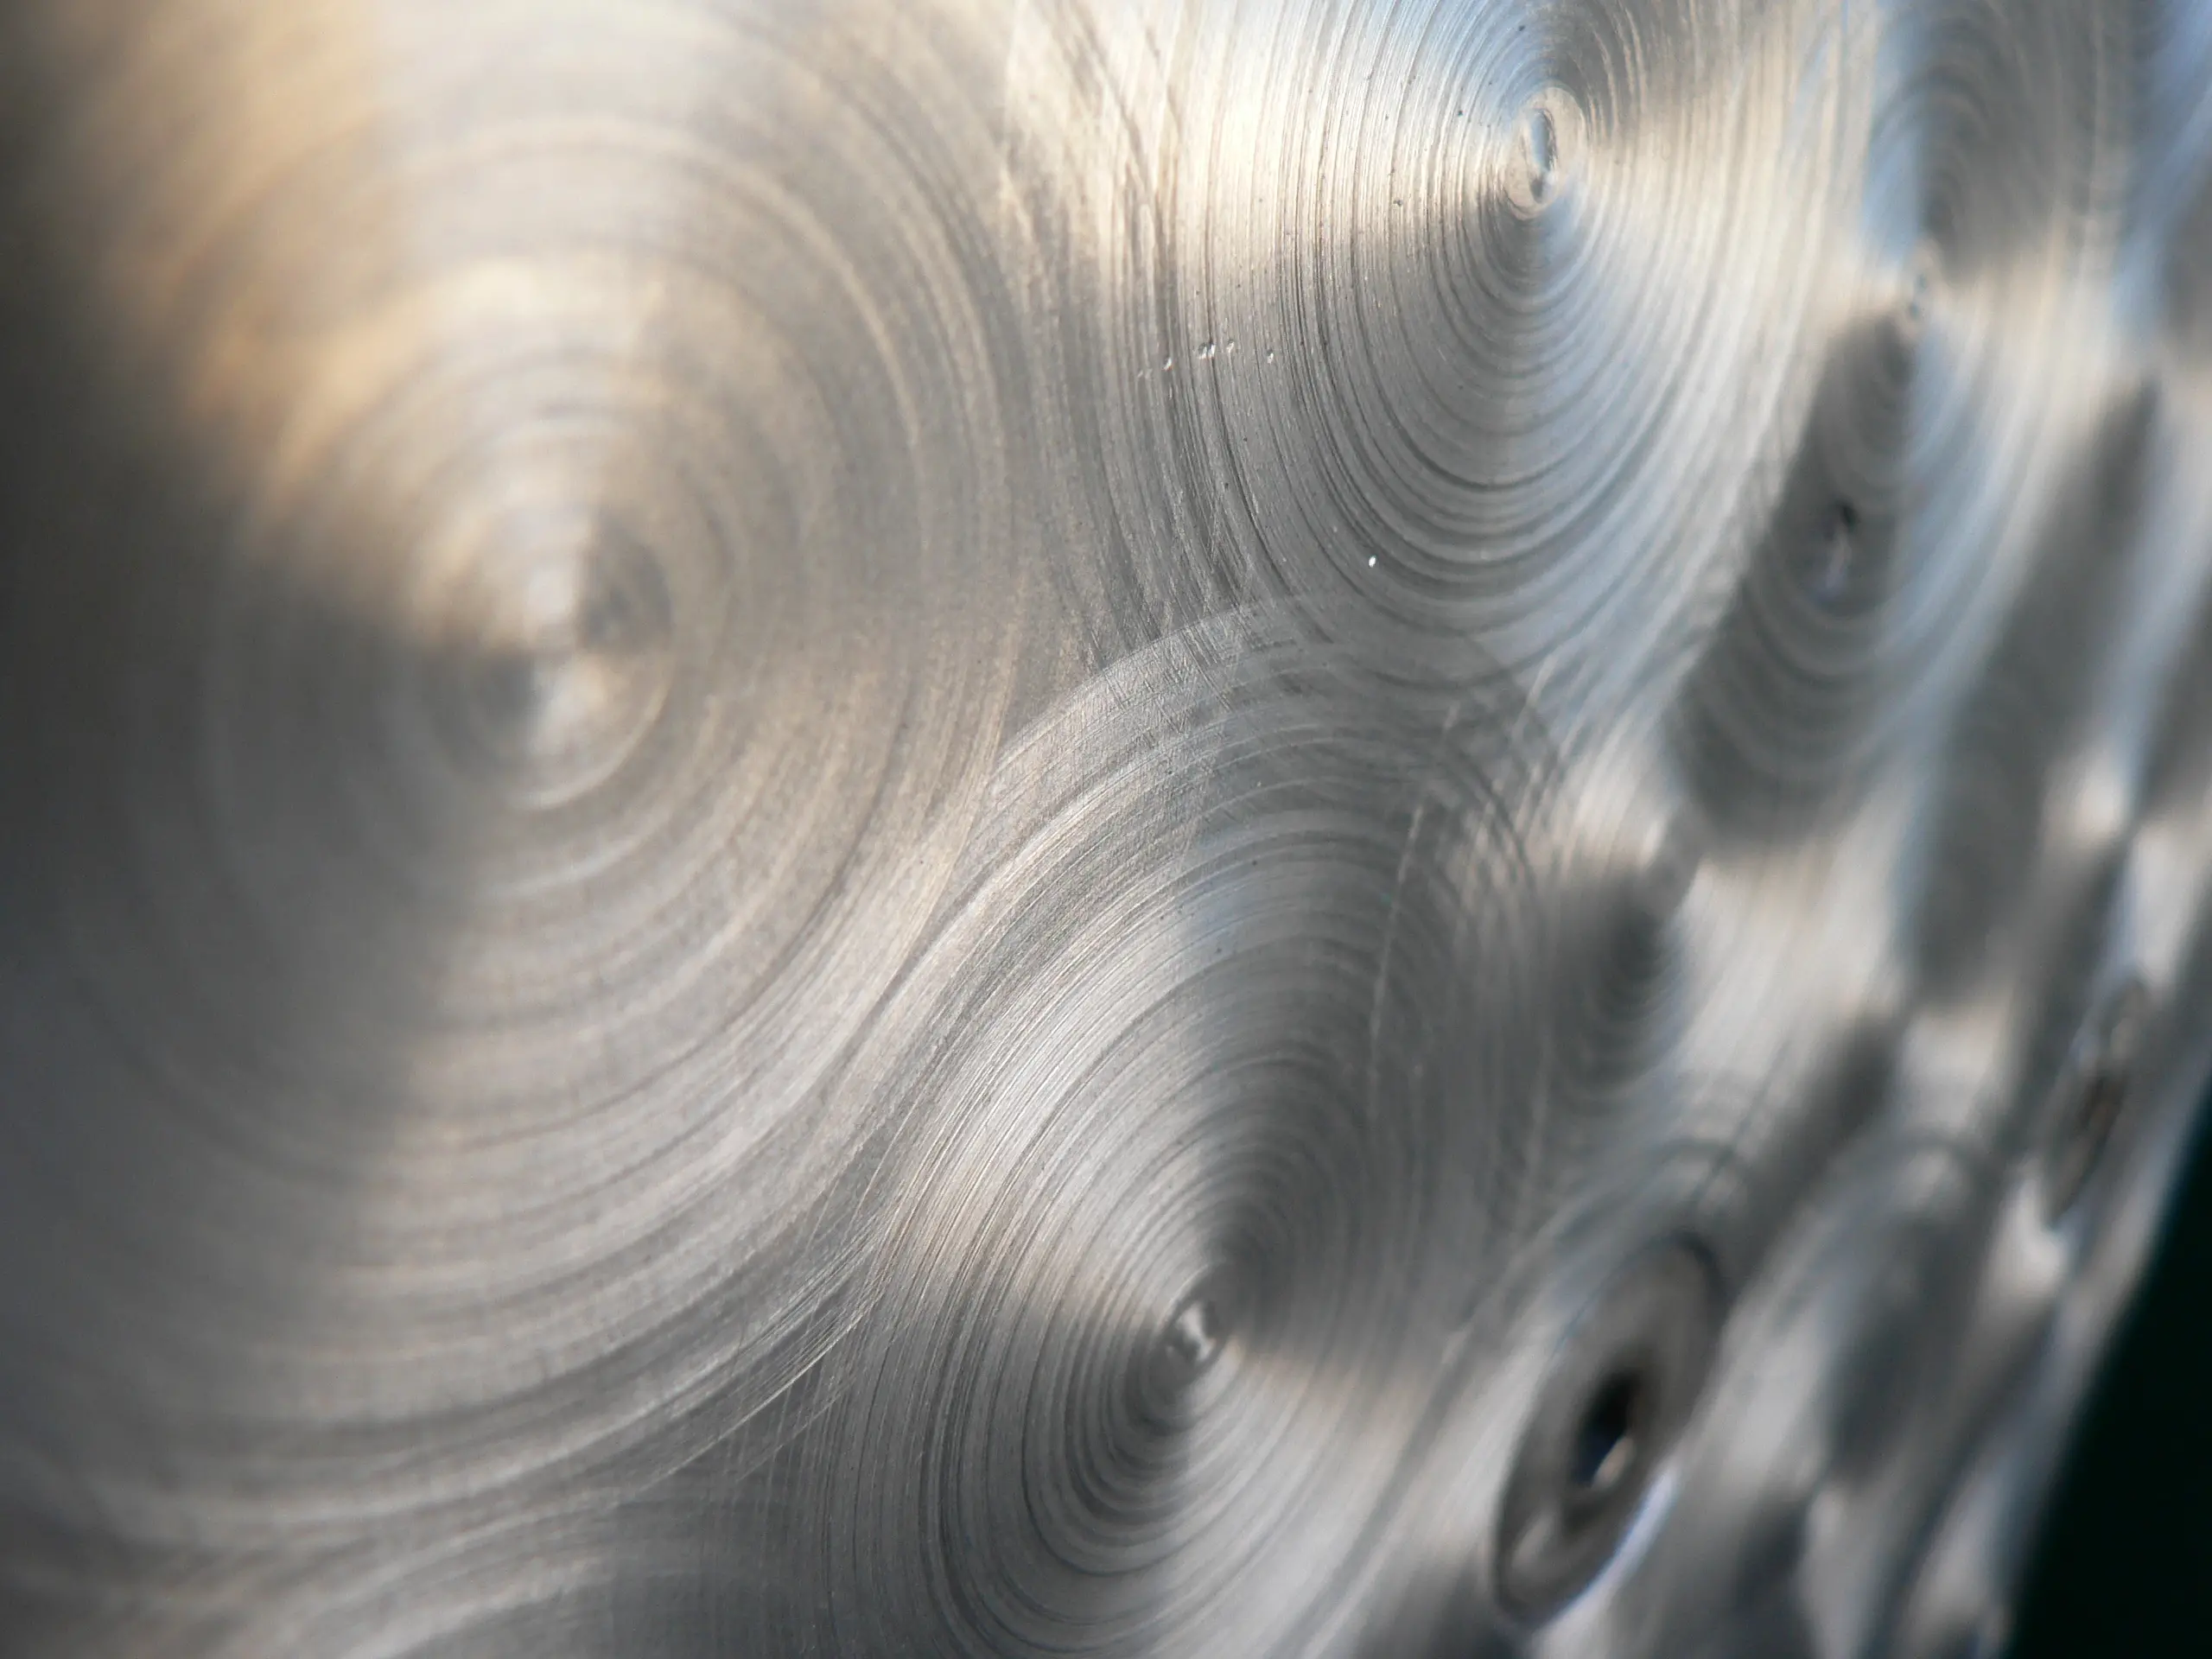 Aluminium is in great demand for its unique qualities such as durability, strength and its ability to be recycled forever without loss of quality.